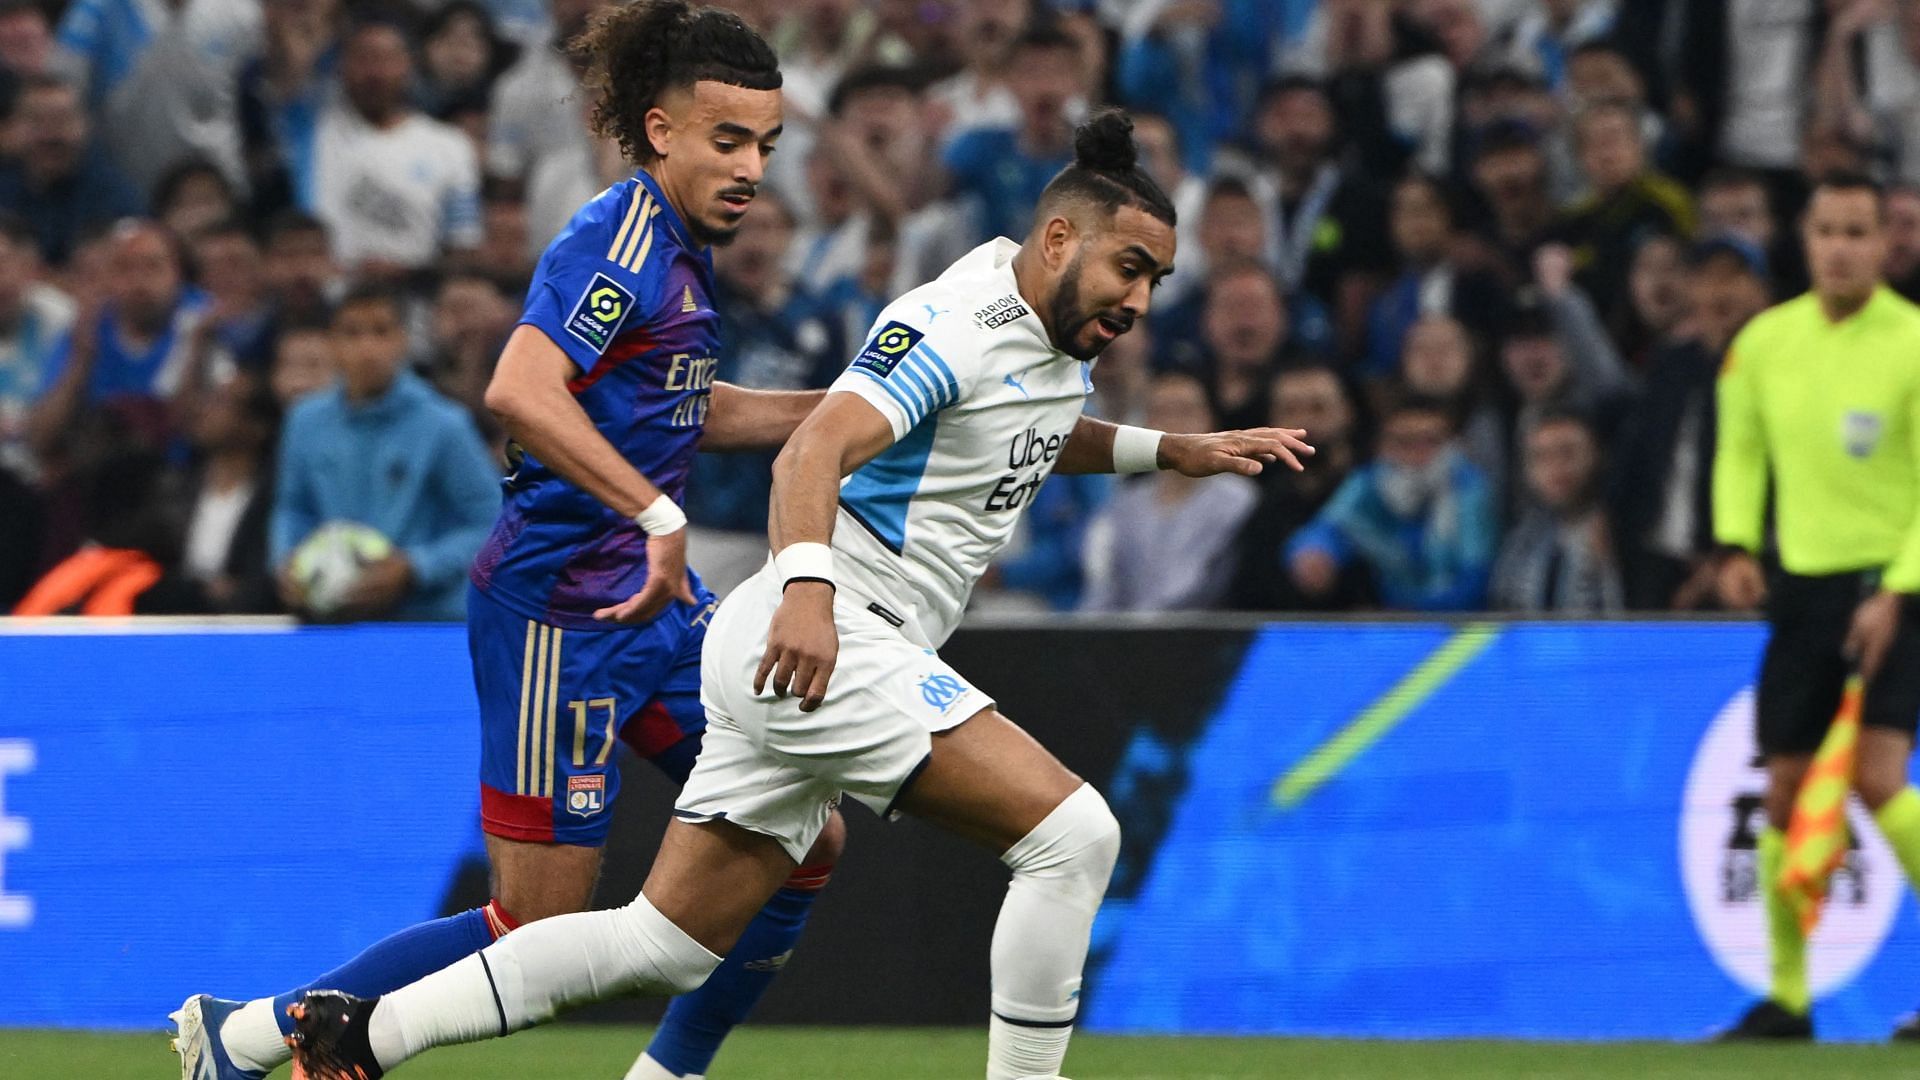 Marseille and Lyon lock horns in an exciting Ligue 1 game on Sunday